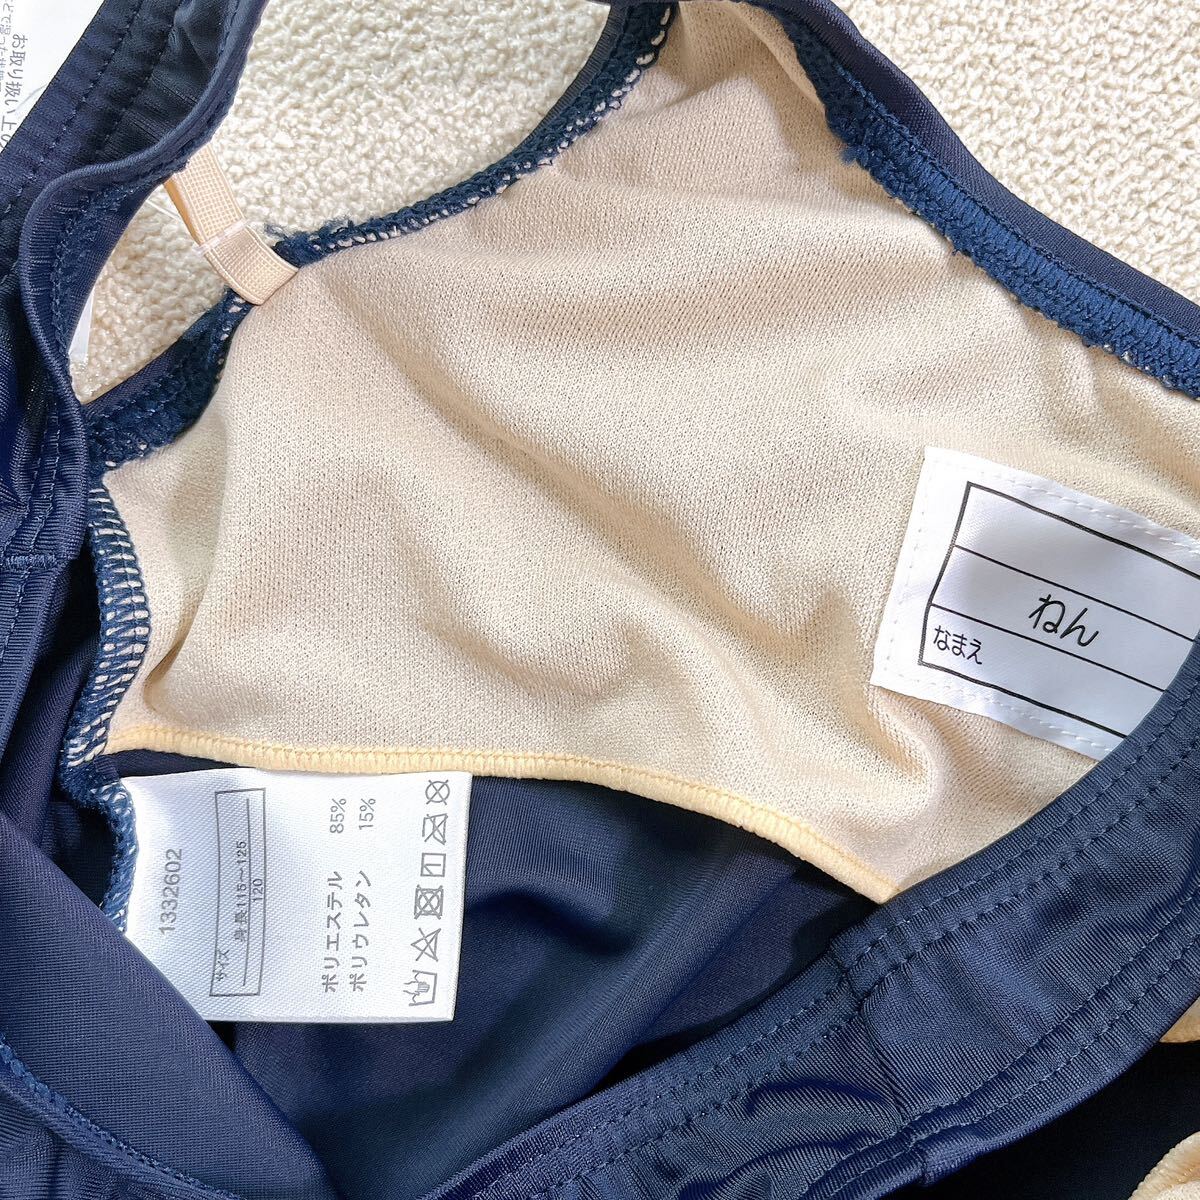  swimsuit / school swimsuit / One-piece / skirt / number attaching /120cm/ new goods / tag attaching / navy / dark blue / girl / child / plain / pool / elementary school student / anonymity delivery 